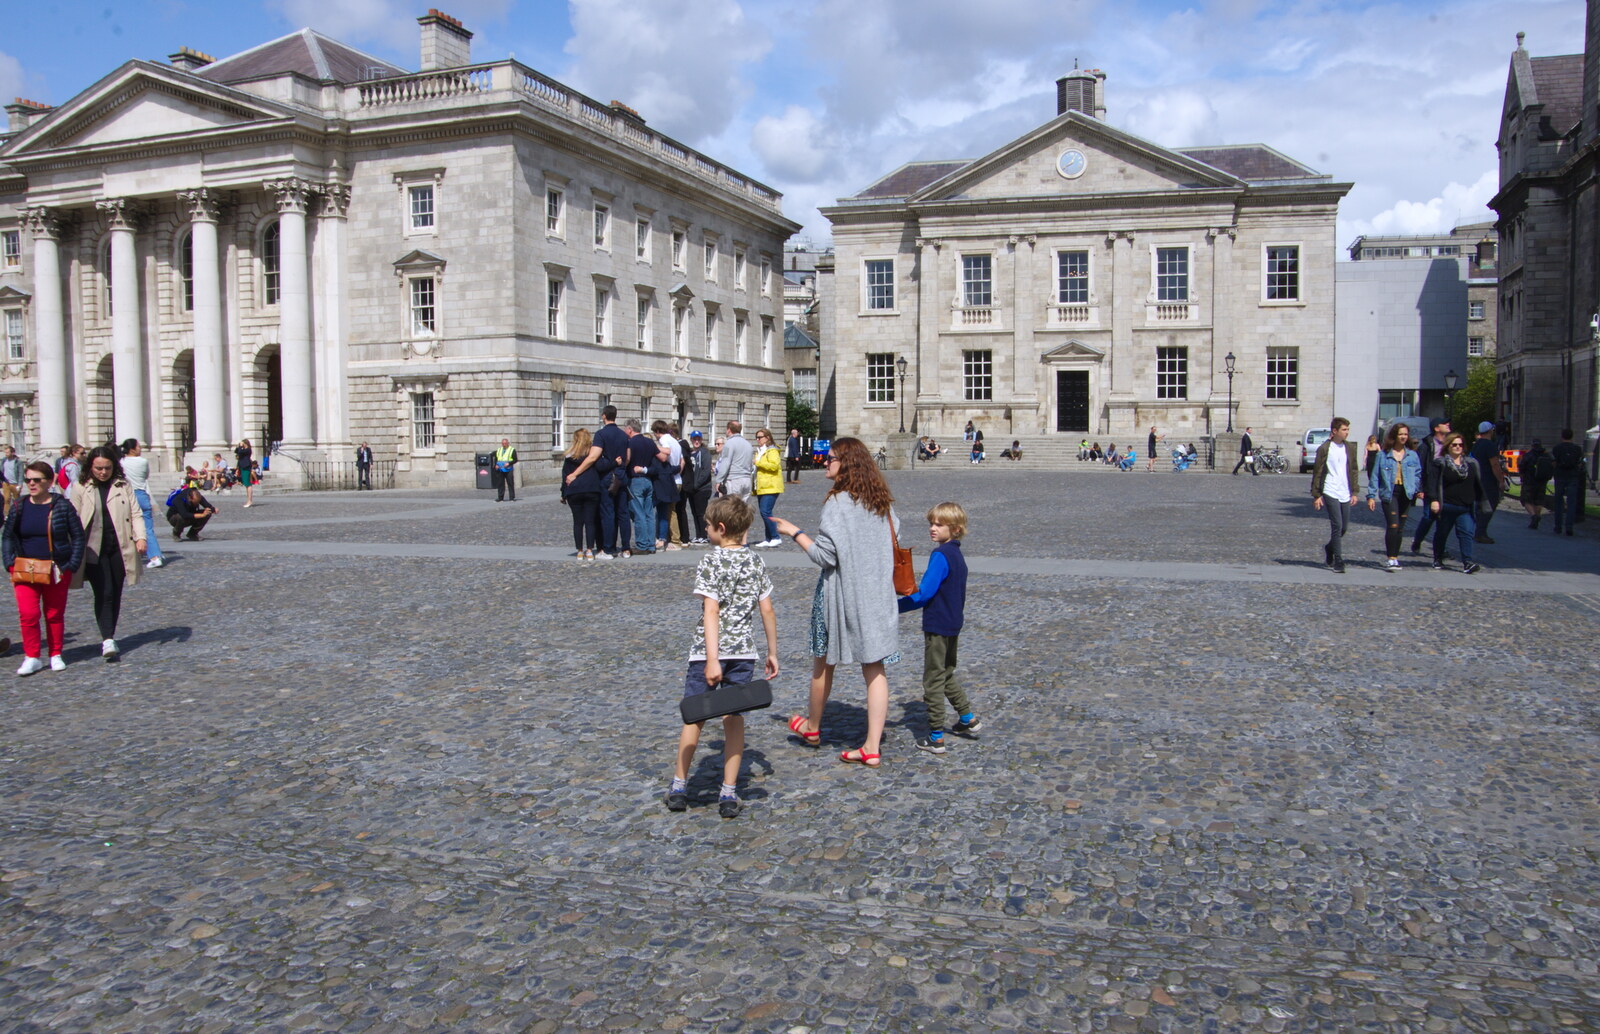 Roaming around Trinity College from Busking in Temple Bar, Dublin, Ireland - 12th August 2019